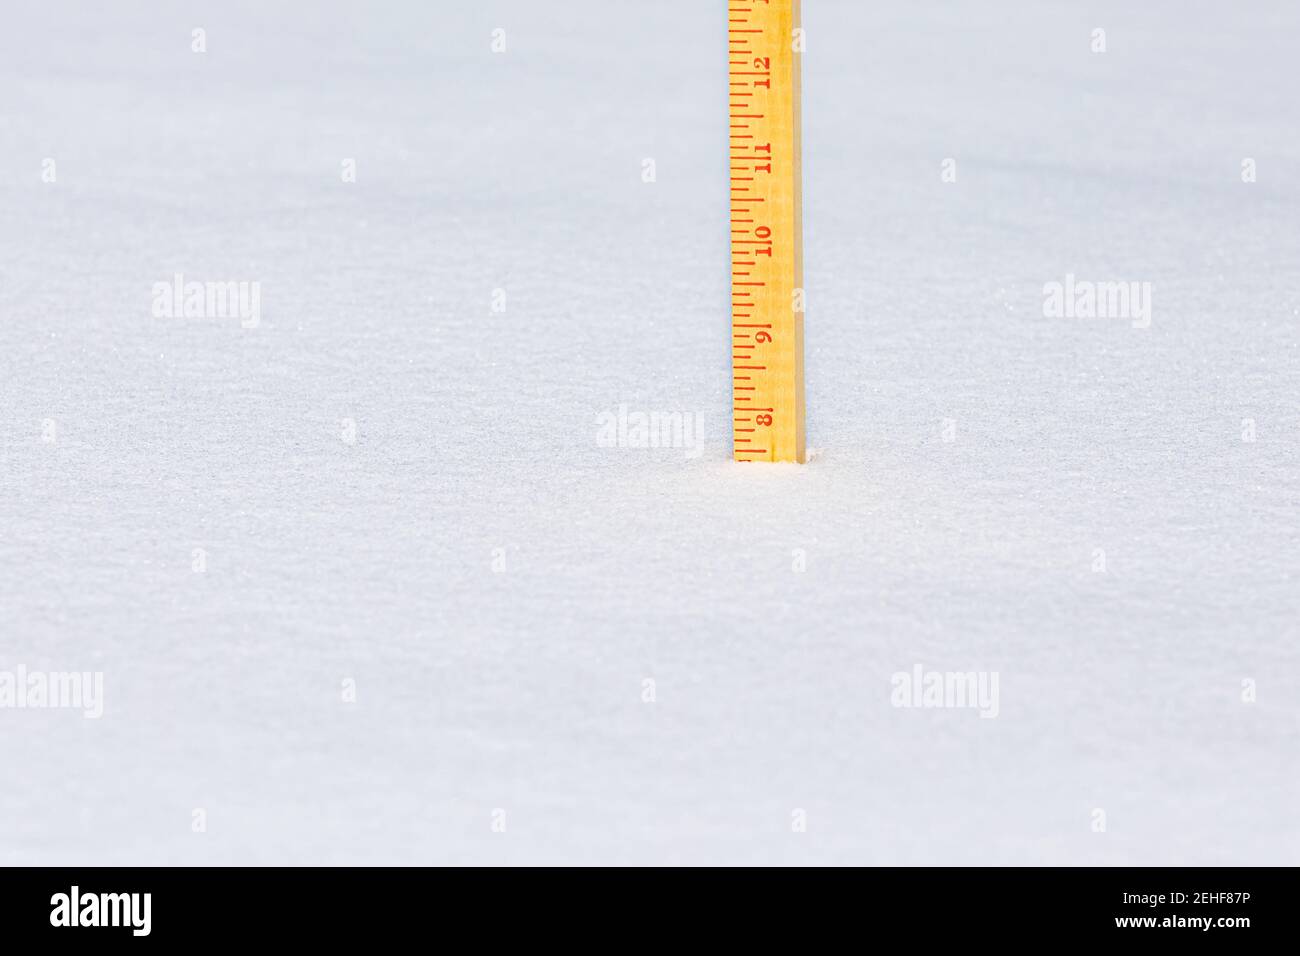 Yardstick measuring snow after winter storm. Concept of winter weather, snowstorm and weather forecast Stock Photo